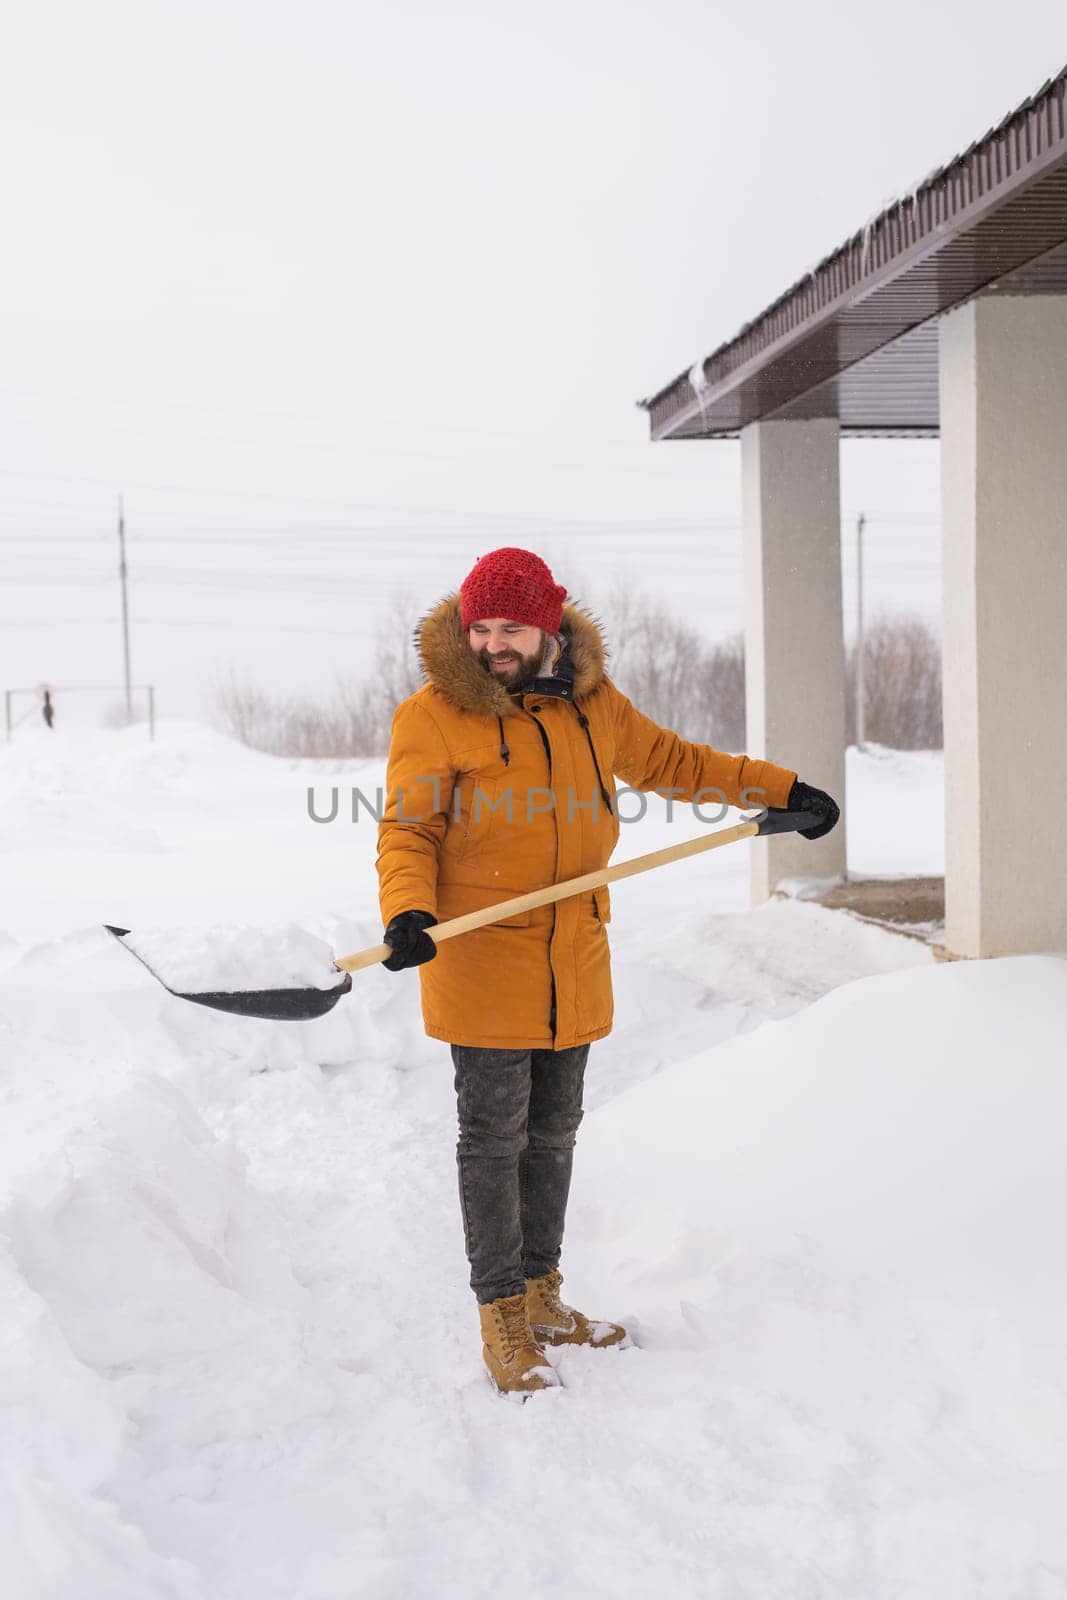 A man cleans and clears the snow in front of the house on frosty day. Cleaning the street from snow on a winter day. Snowfall and severe snowstorm in winter. by Satura86